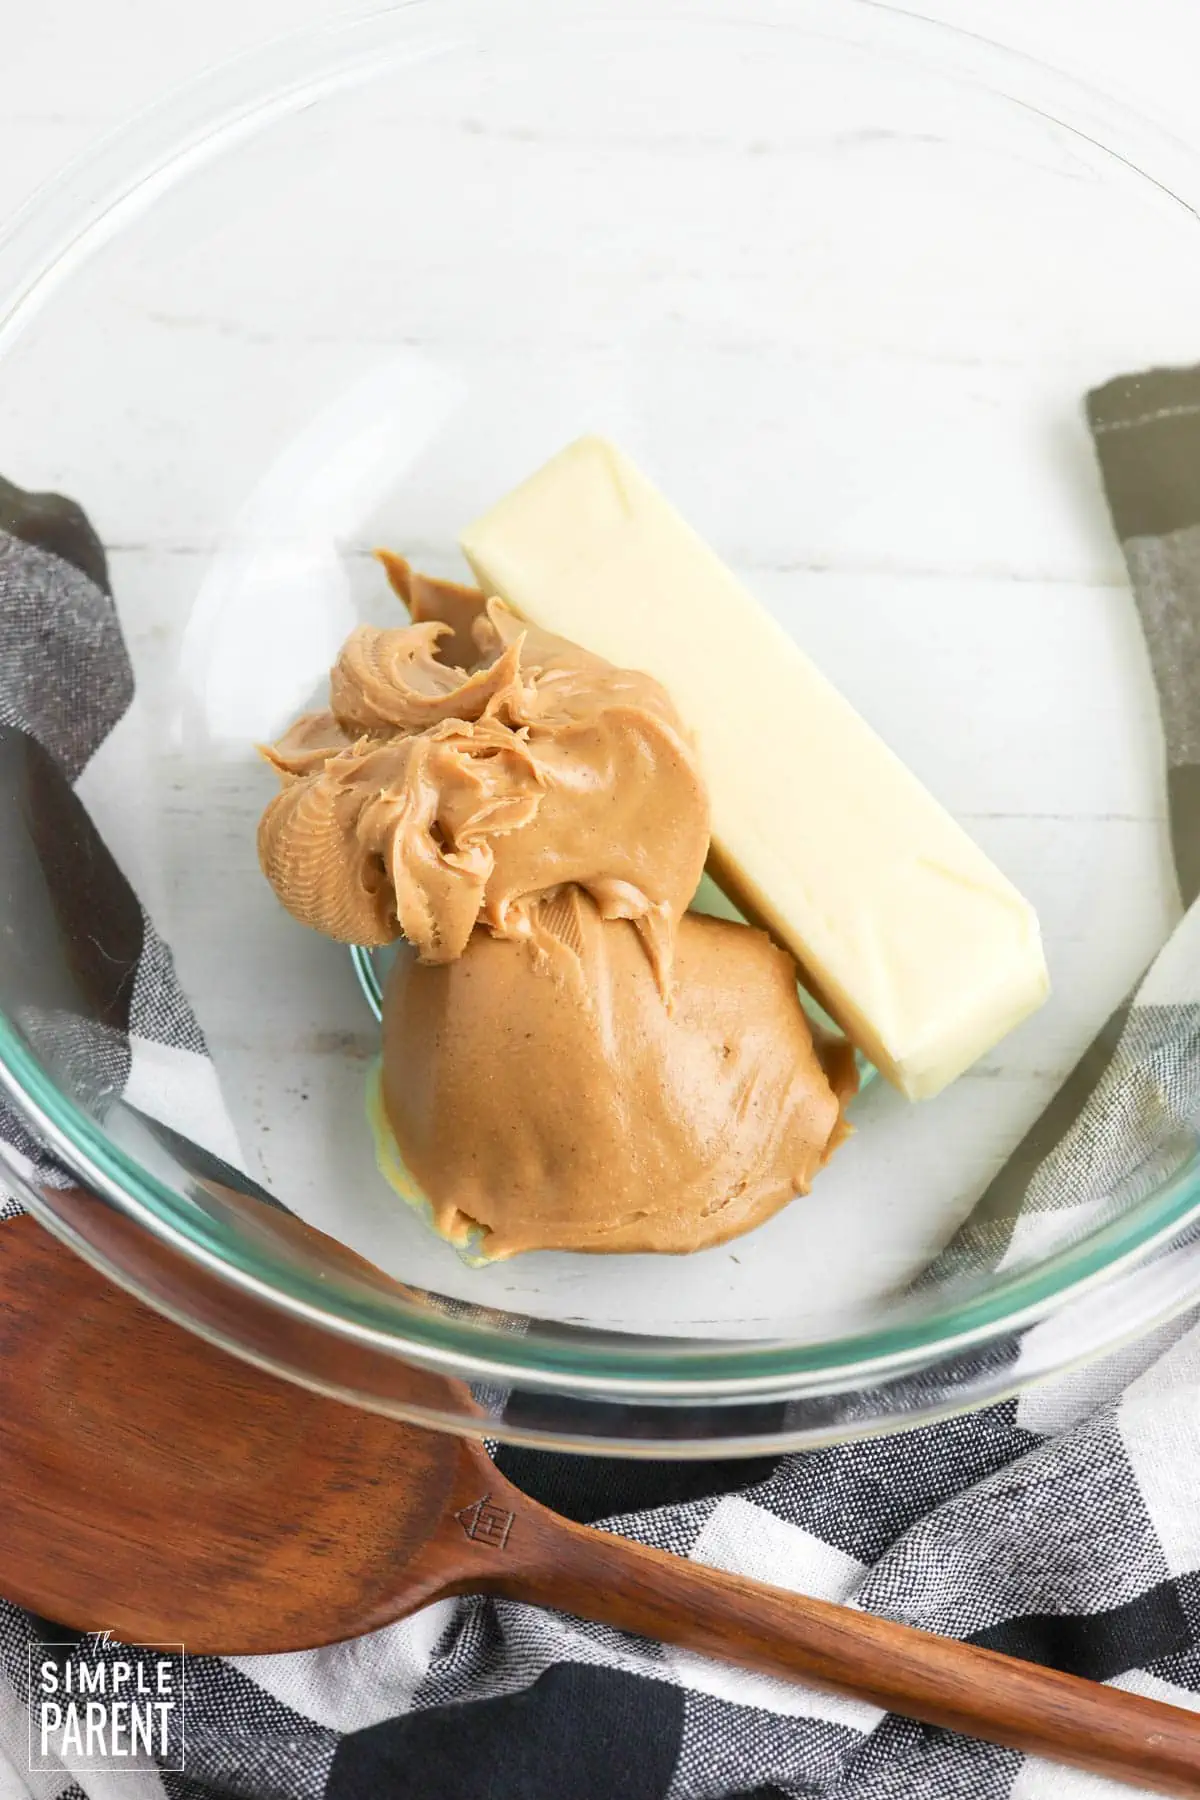 Peanut butter and butter in glass mixing bowl